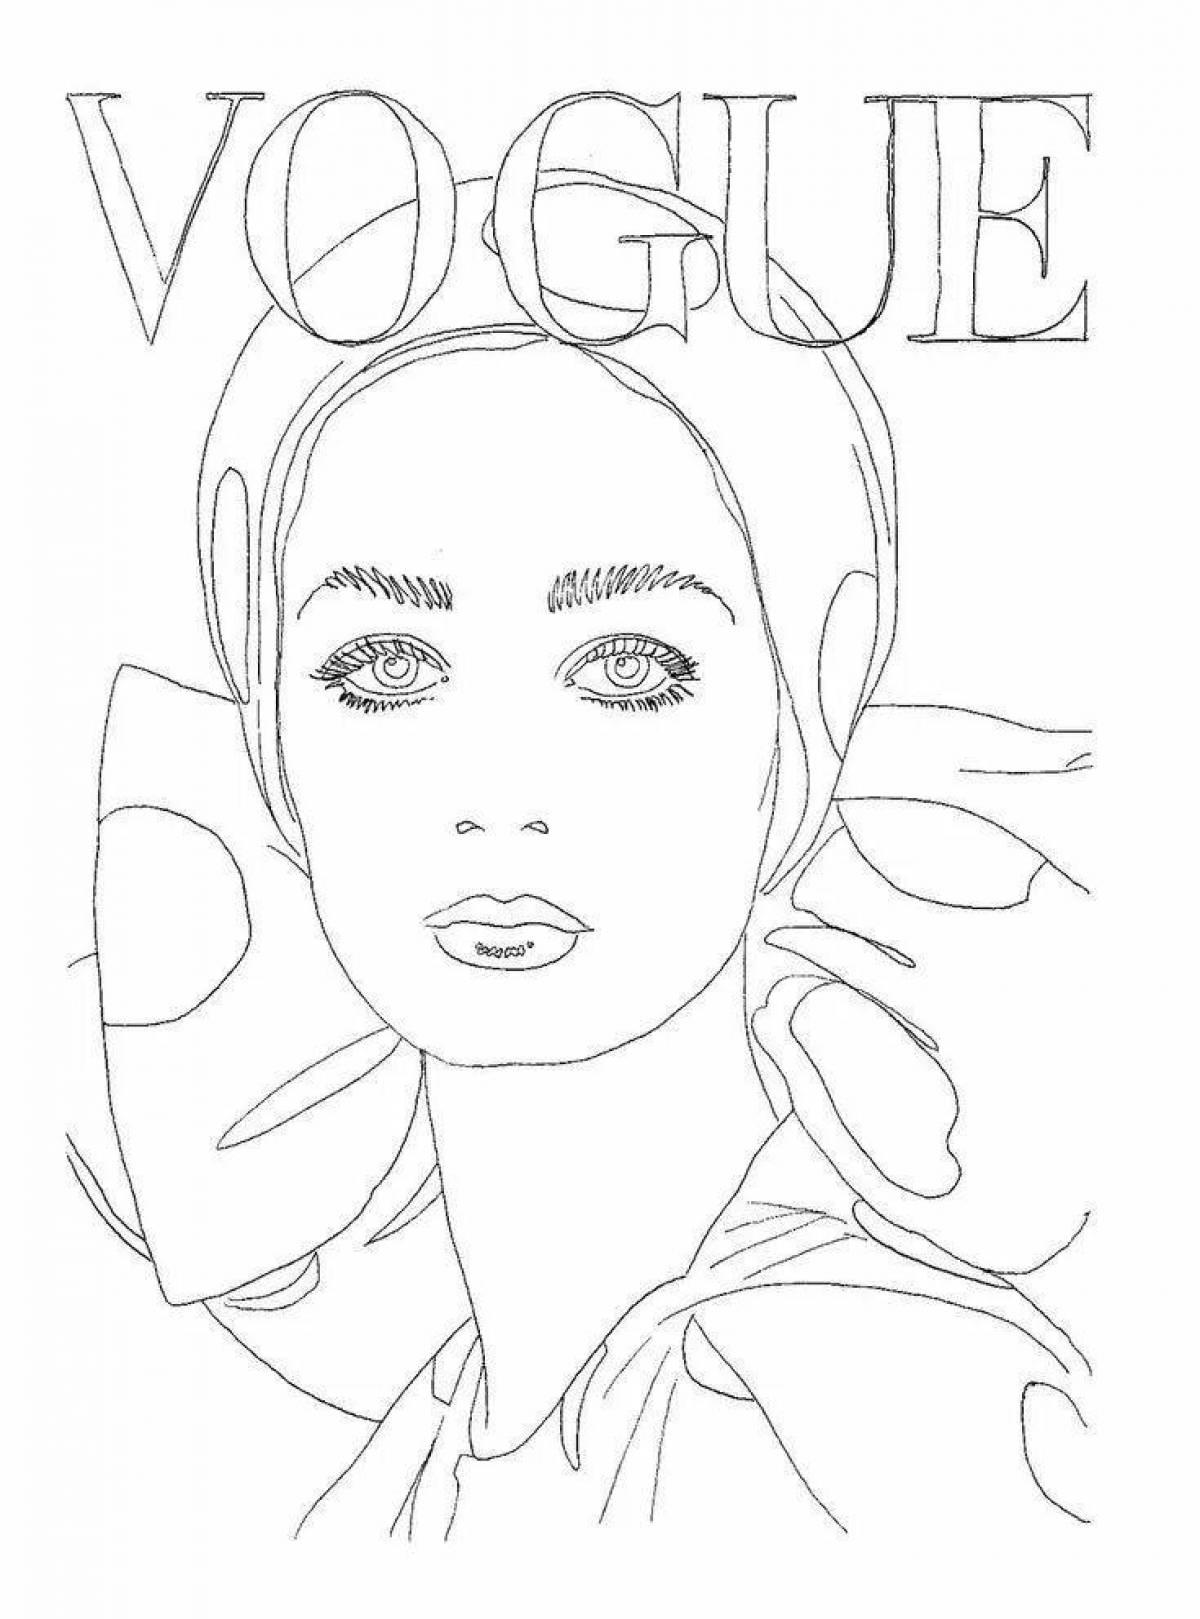 Charming vogue coloring book